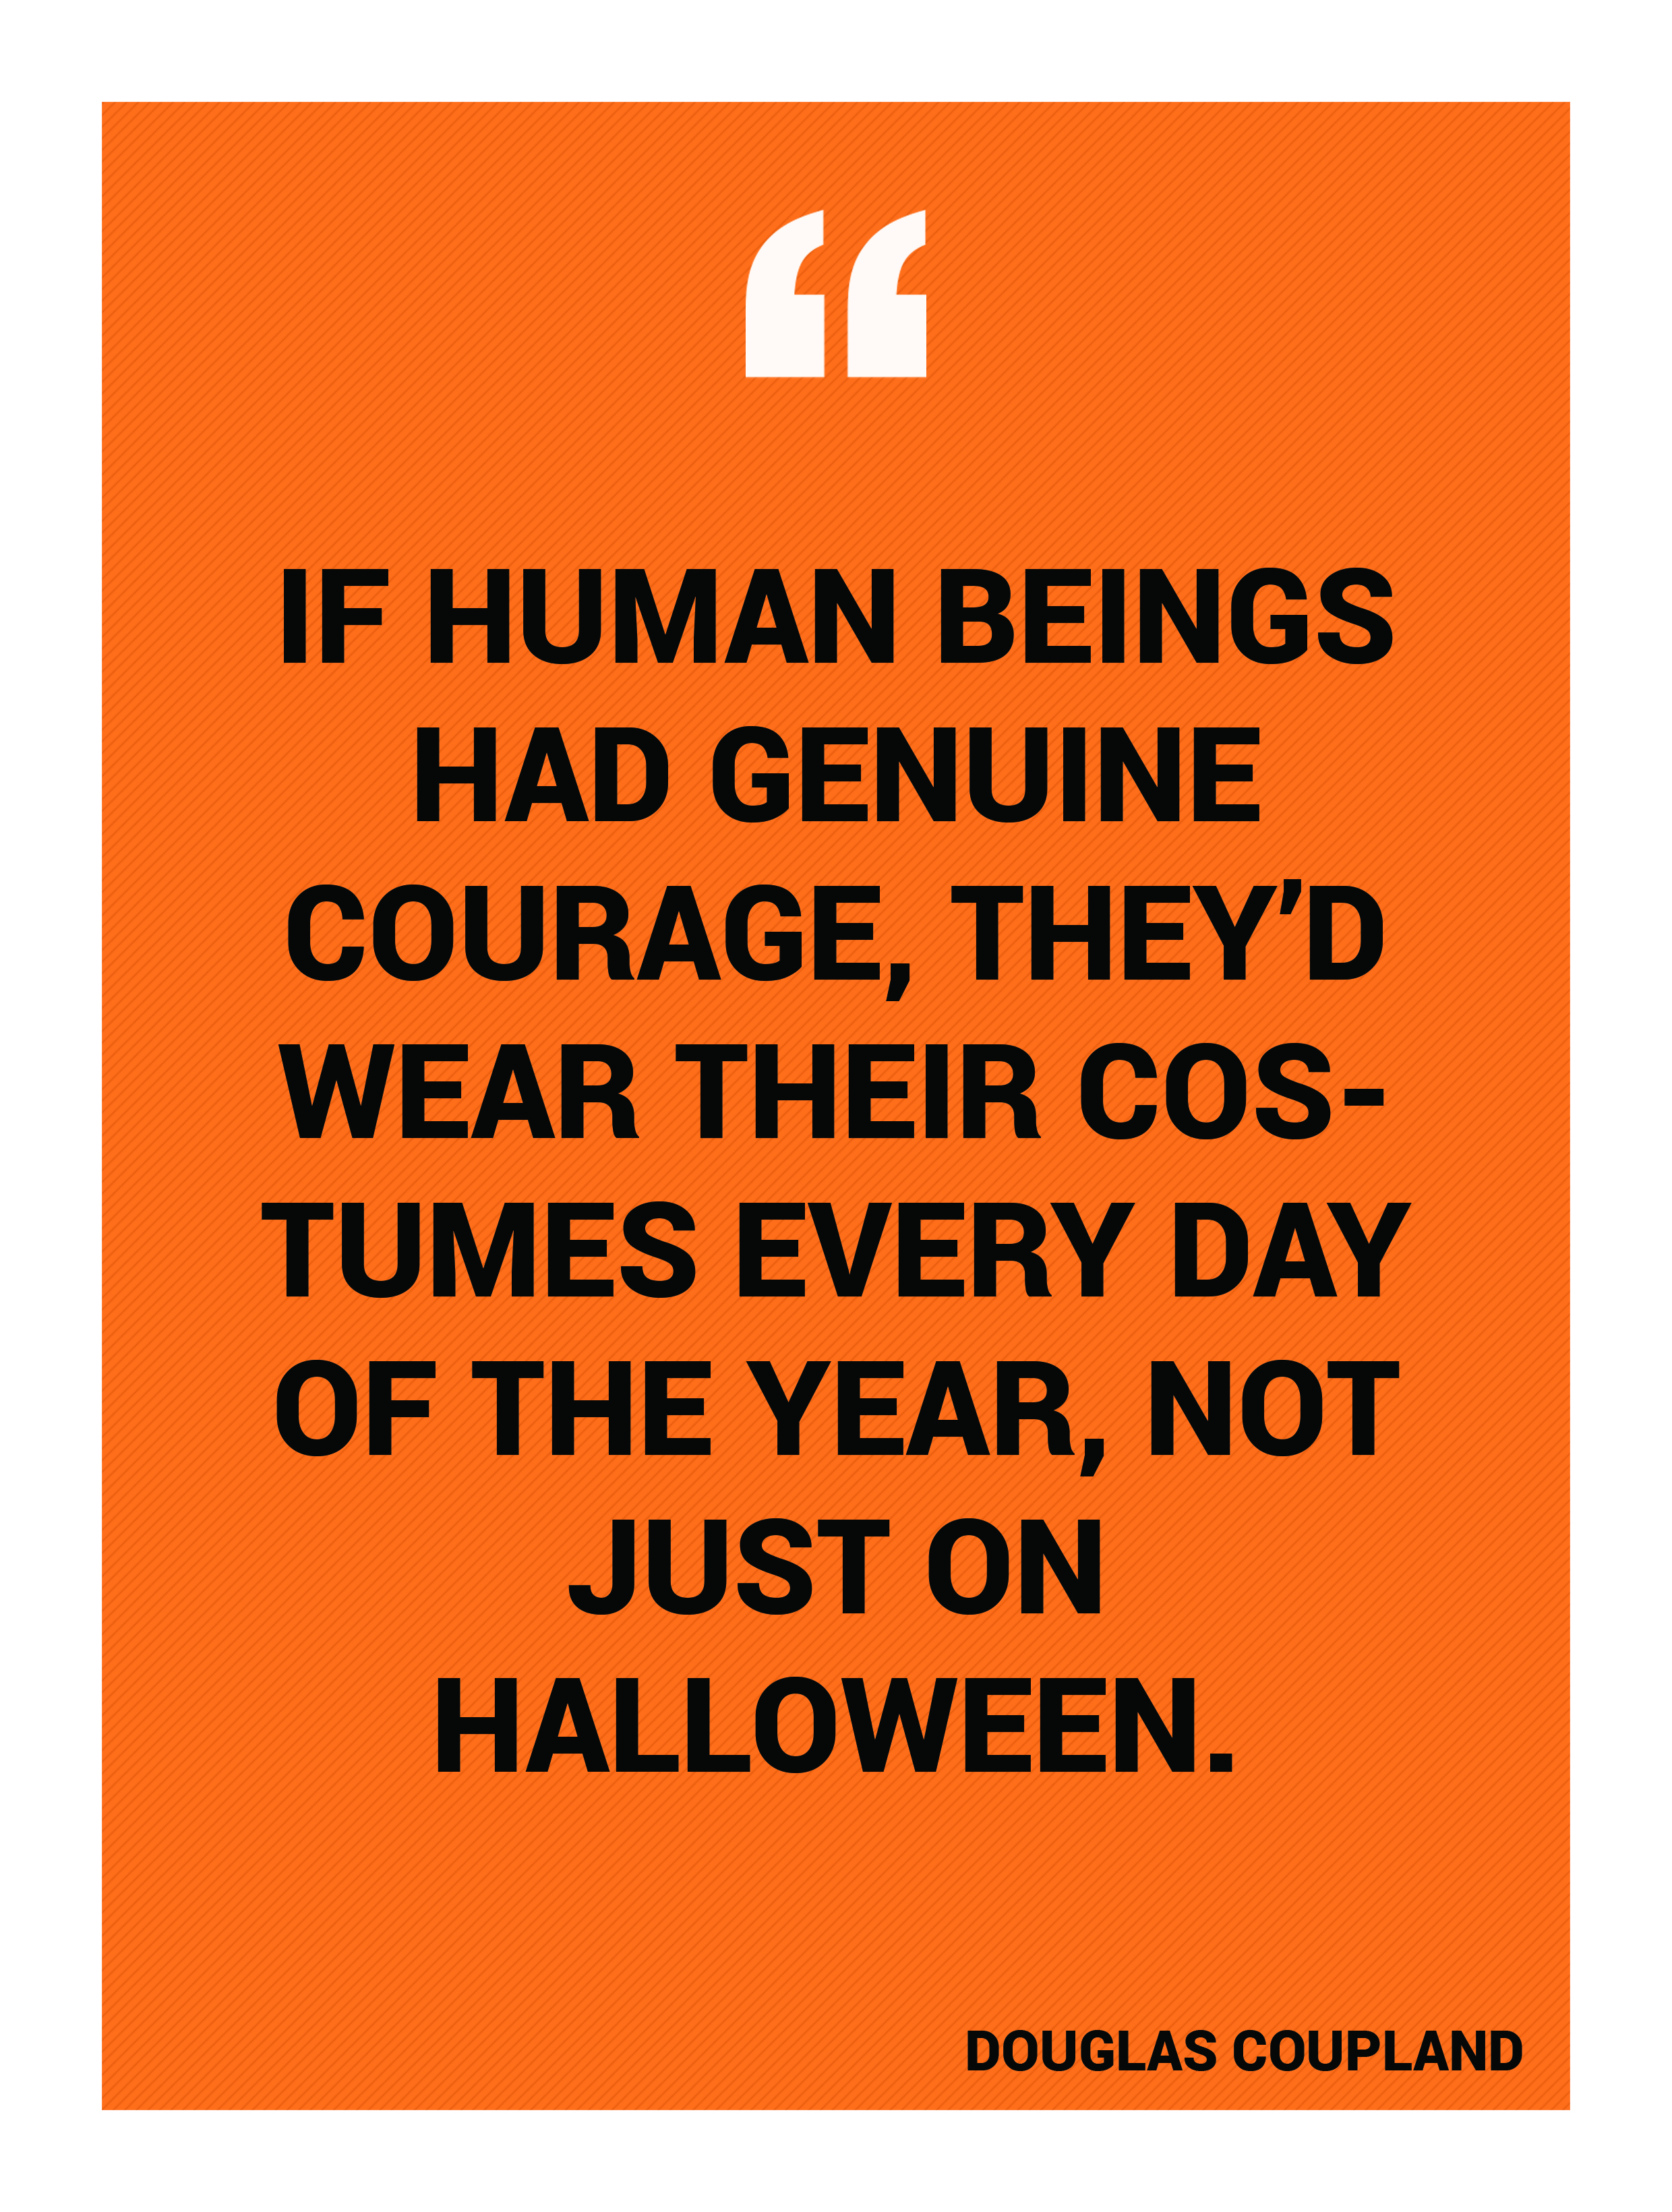 “If human beings had genuine courage, they’d wear their costumes every day of the year, not just on Halloween.” -Douglas Coupland